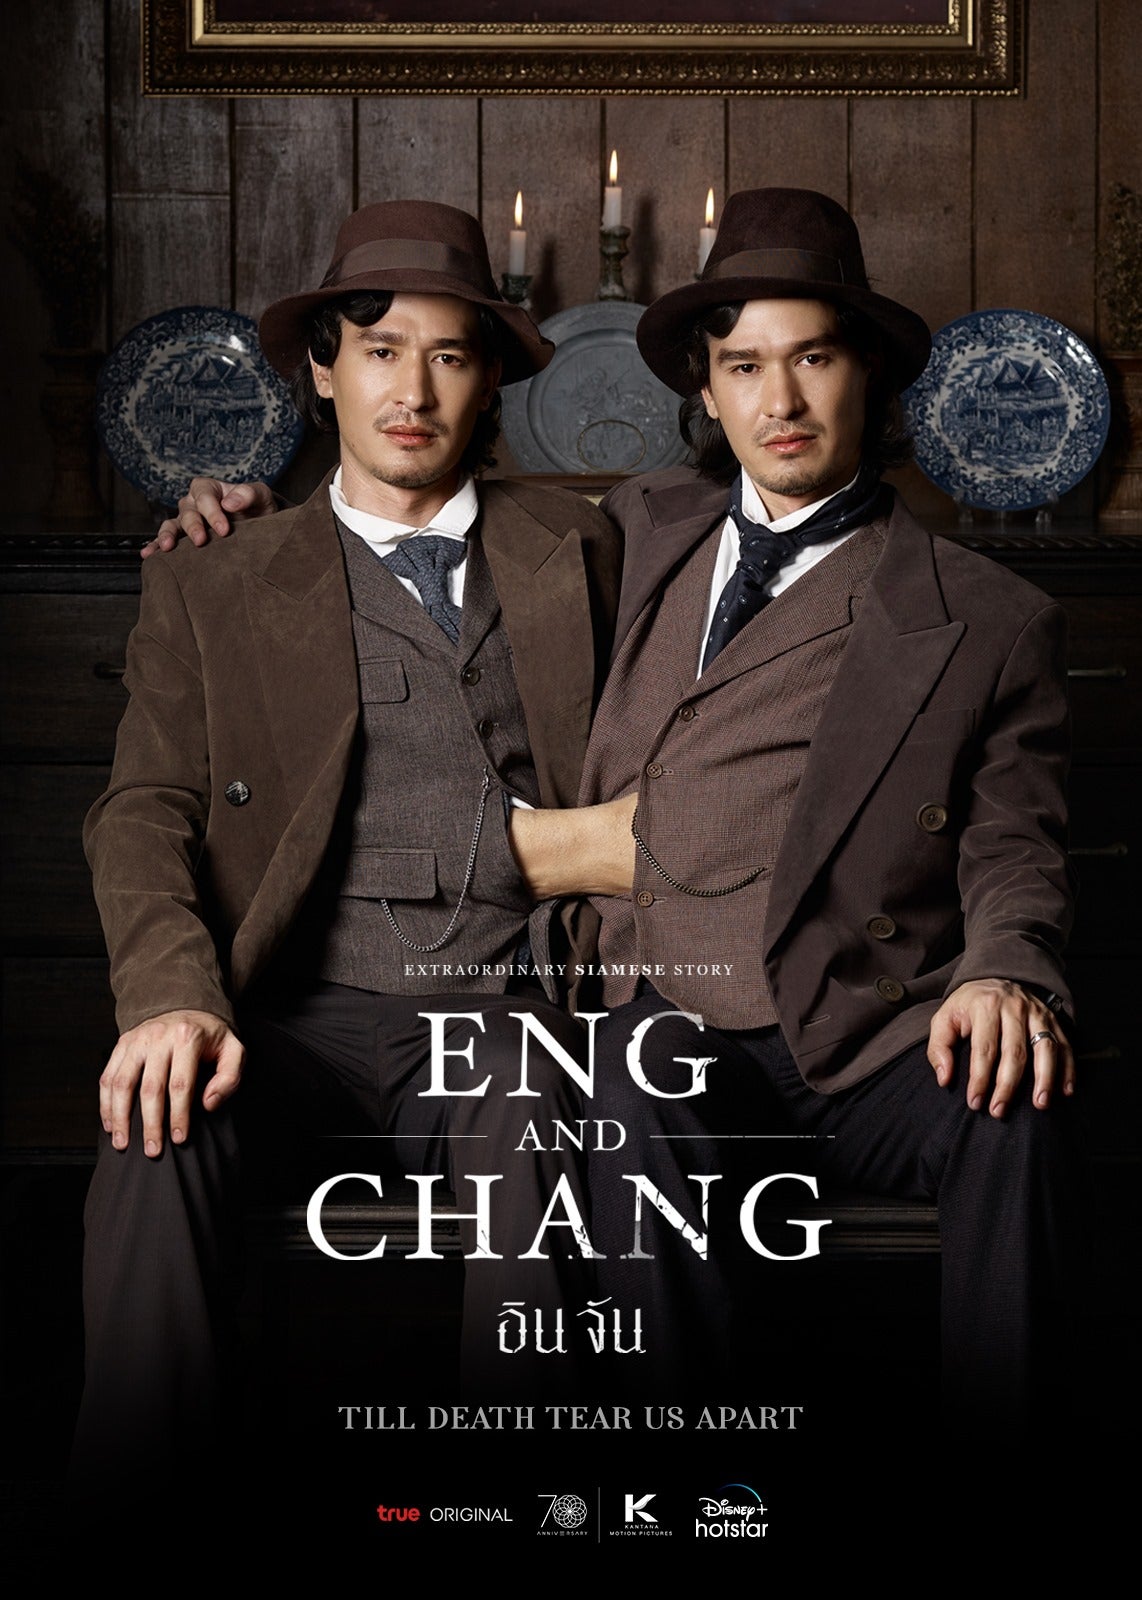 TV ratings for Extraordinary Siamese Story: Eng And Chang (อินจัน) in South Korea. Disney+ TV series